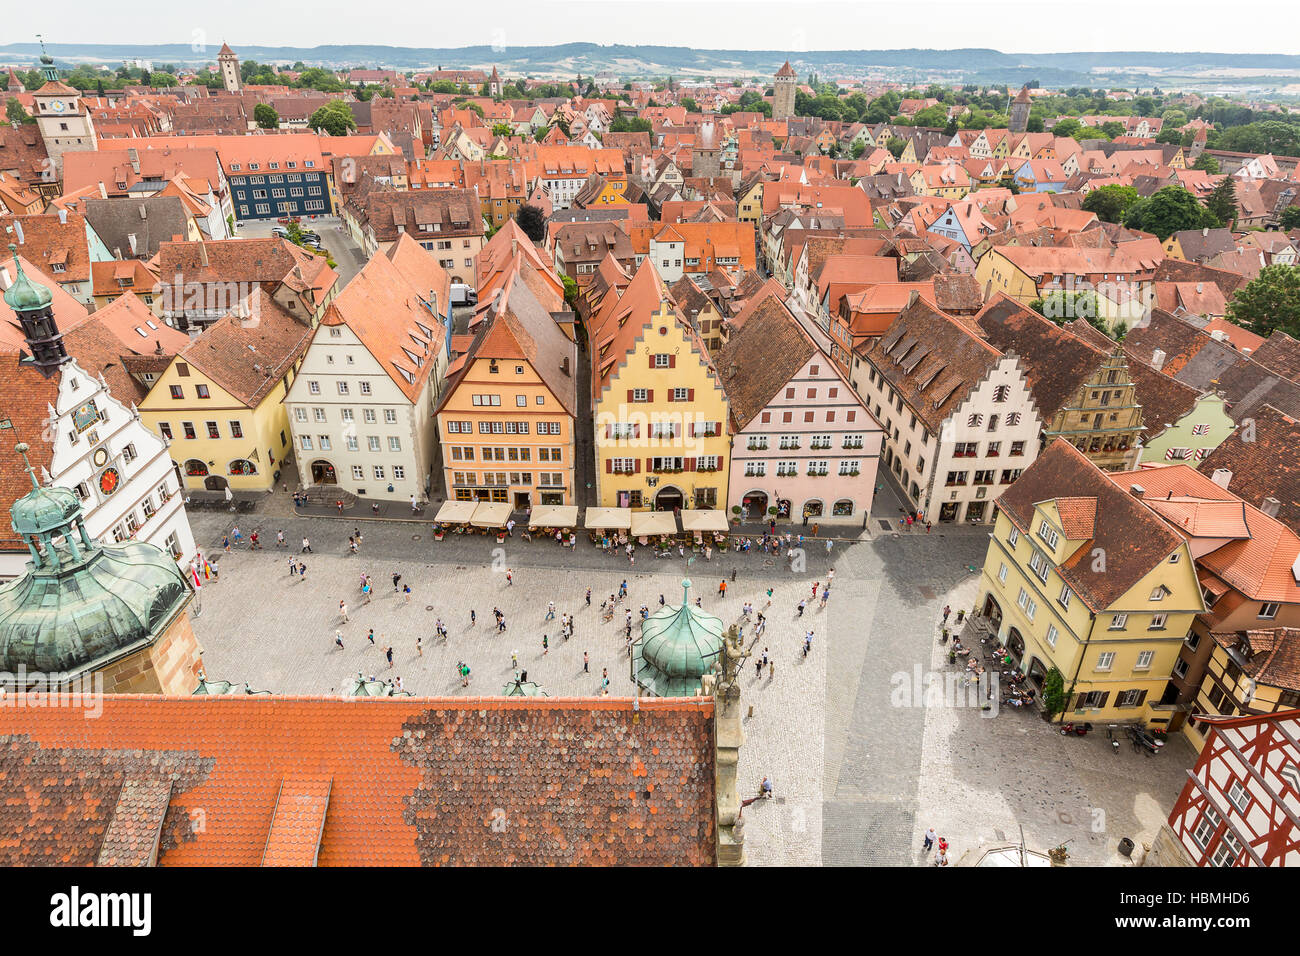 Aerial view of Rothenburg ob der Tauber Stock Photo